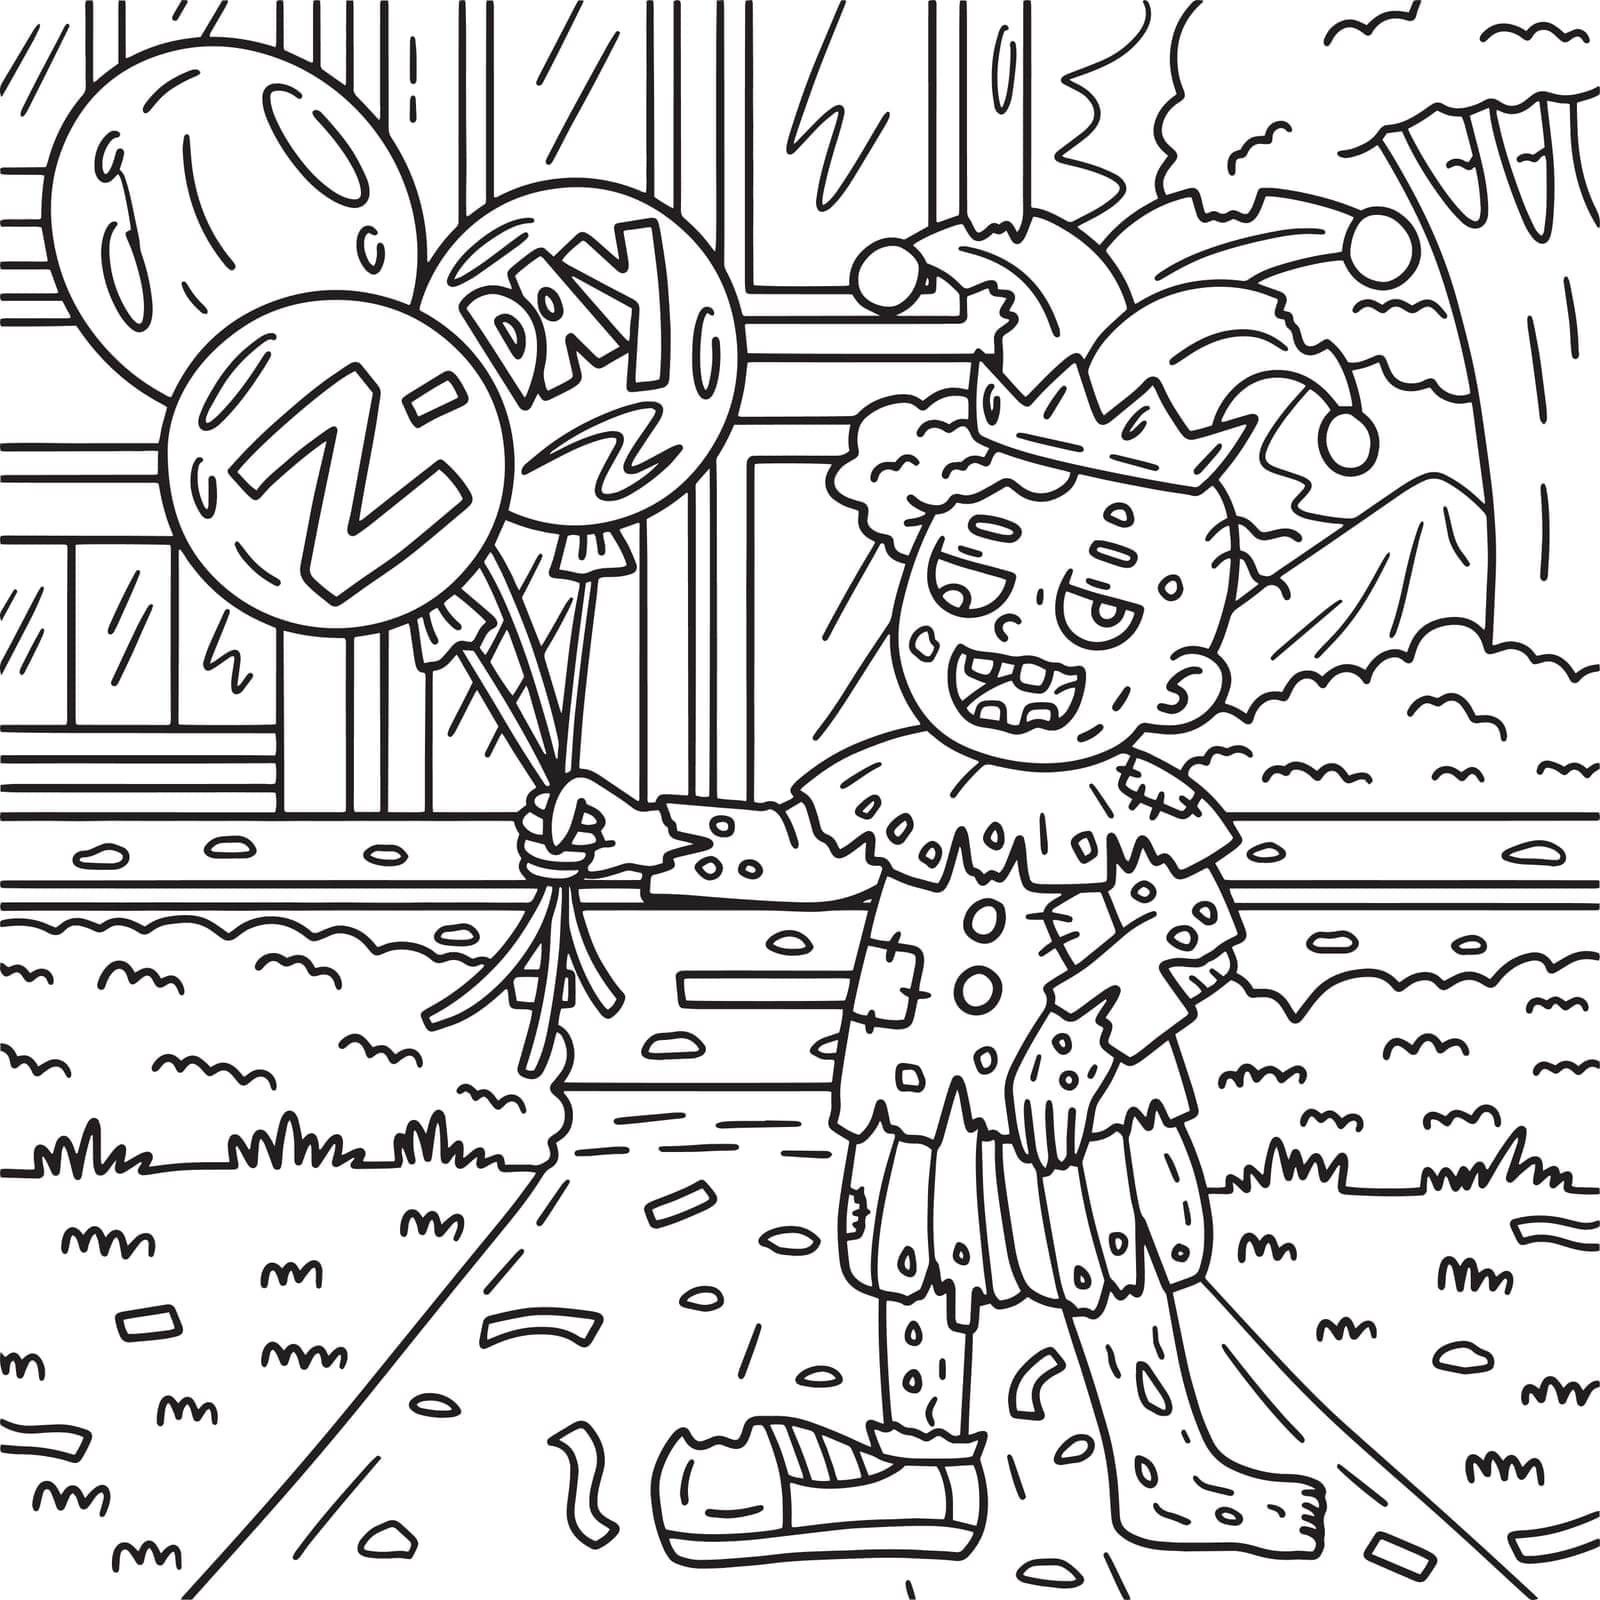 Zombie Clown with Balloons Coloring Pages for Kids by abbydesign